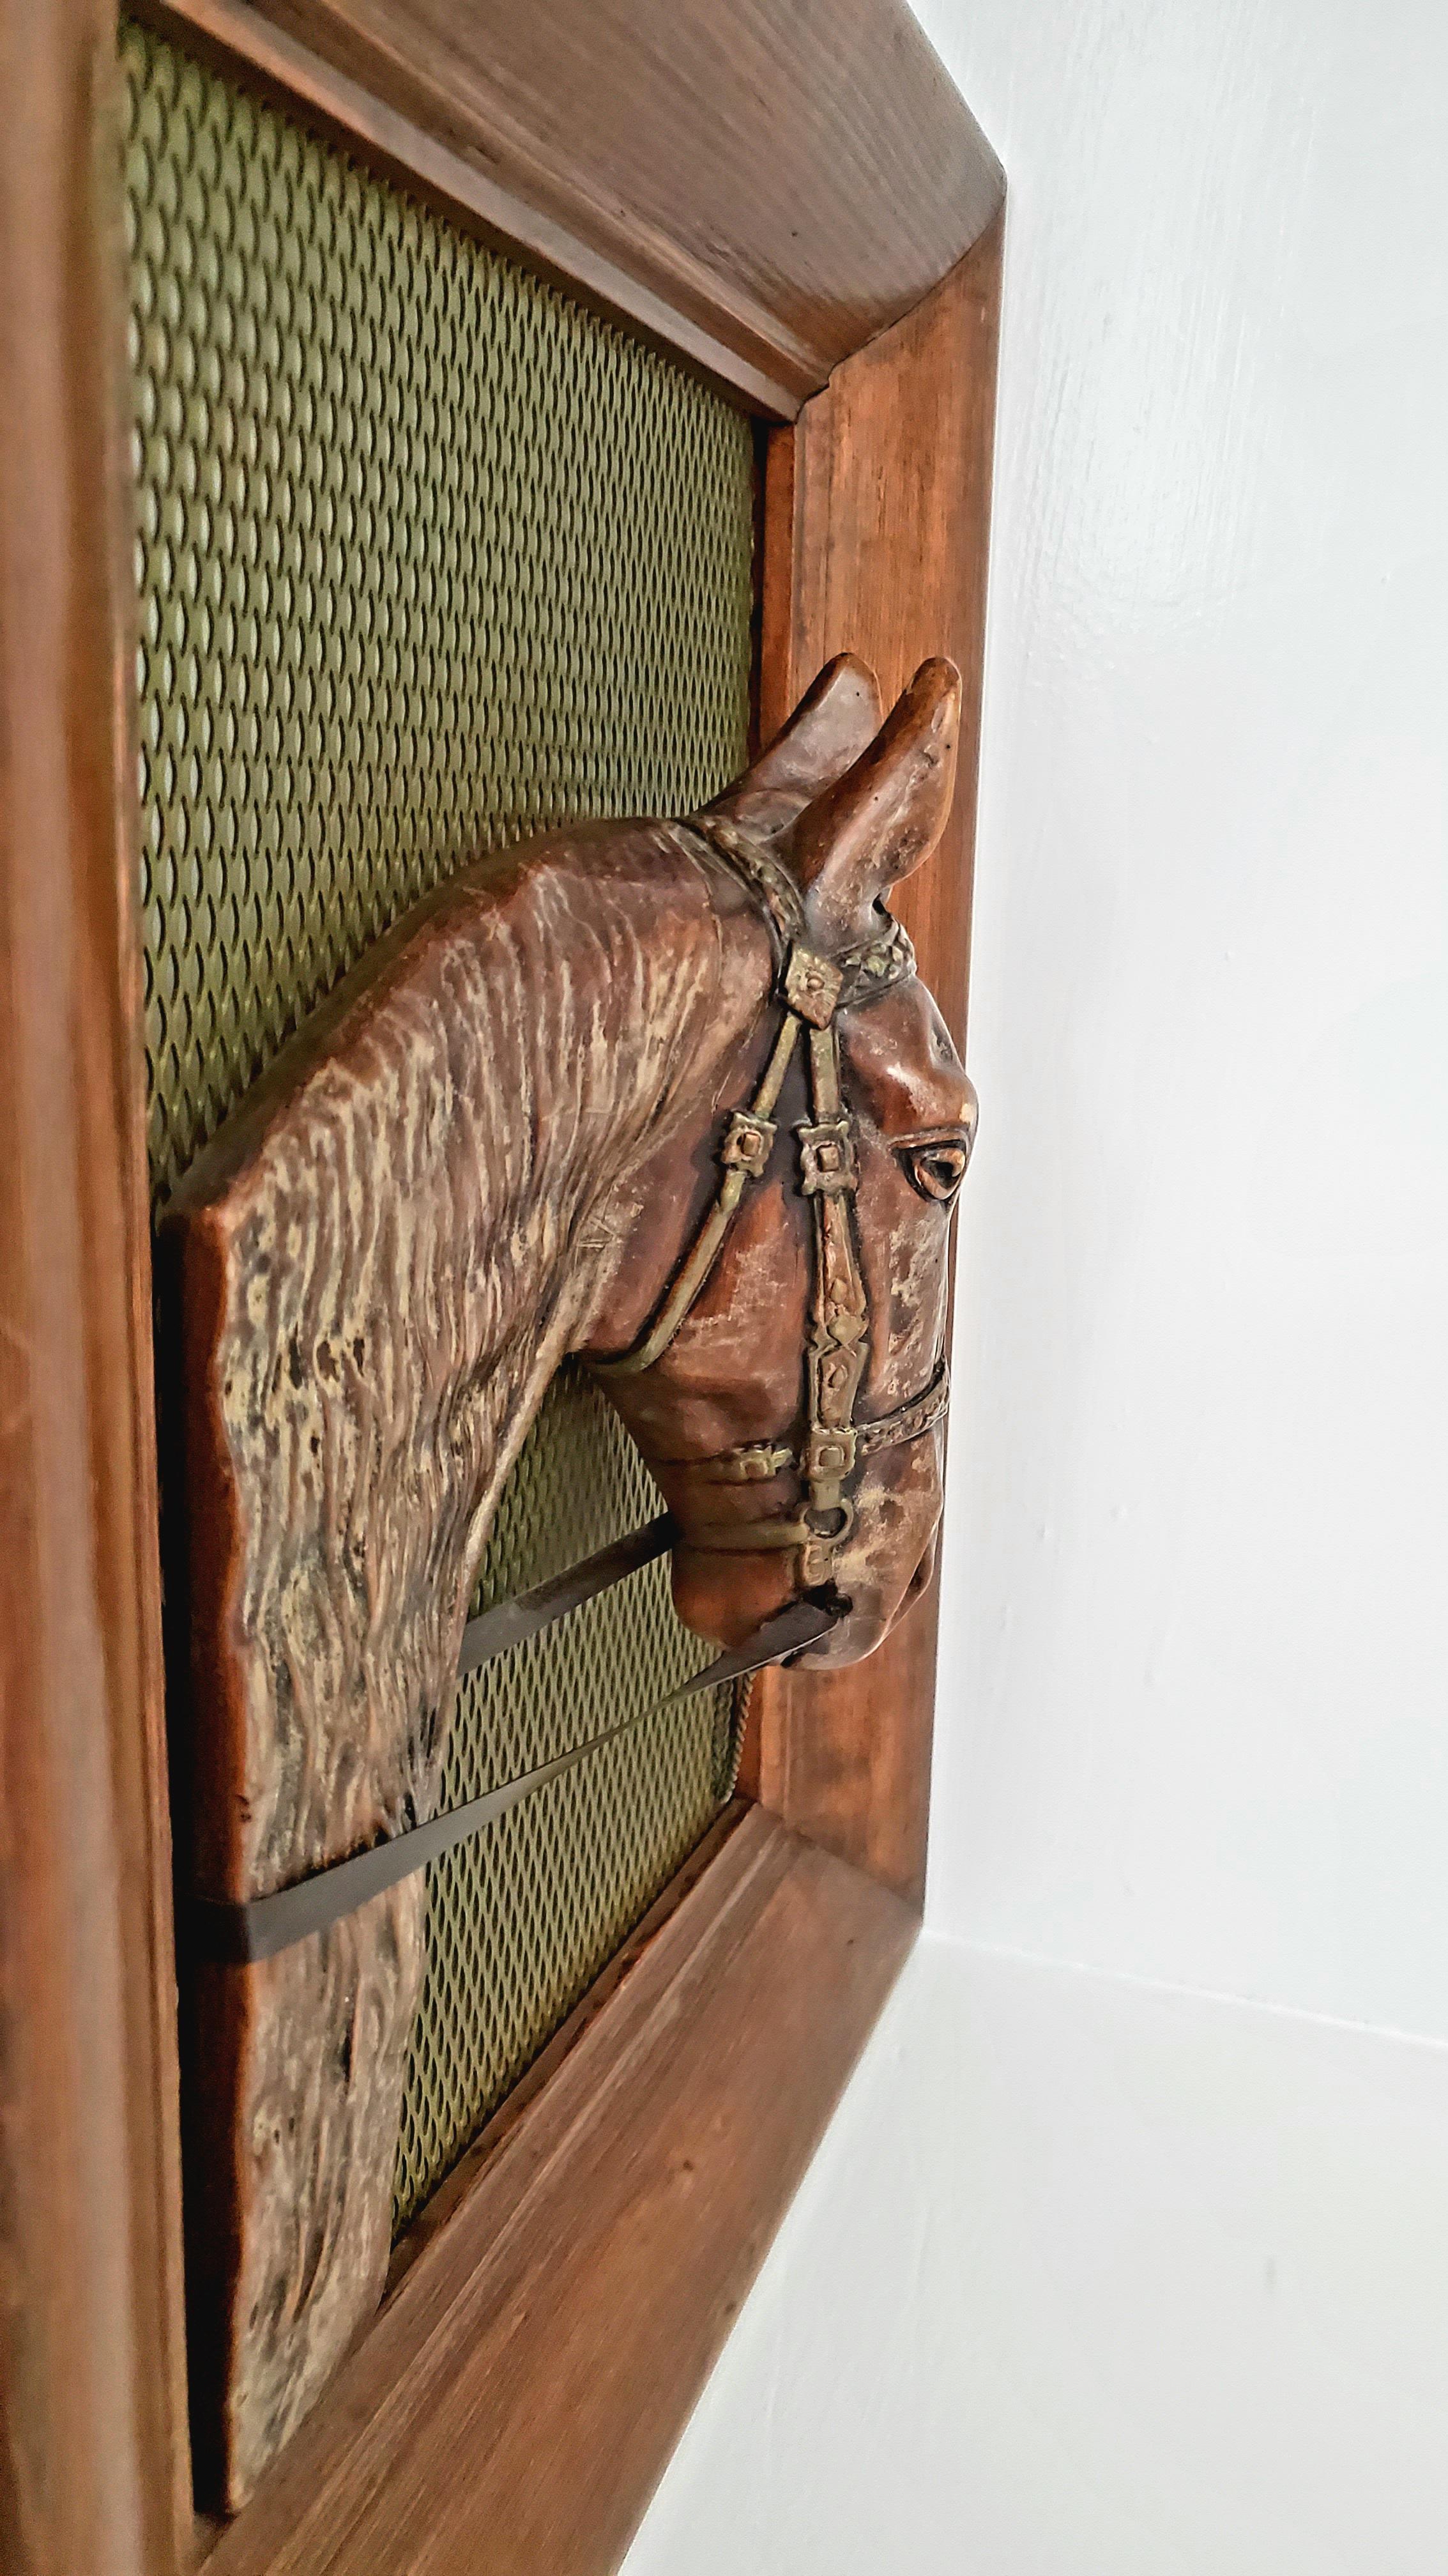 Unknown Antique Horse Sculpture  Framed Copper Horse Head in Relief